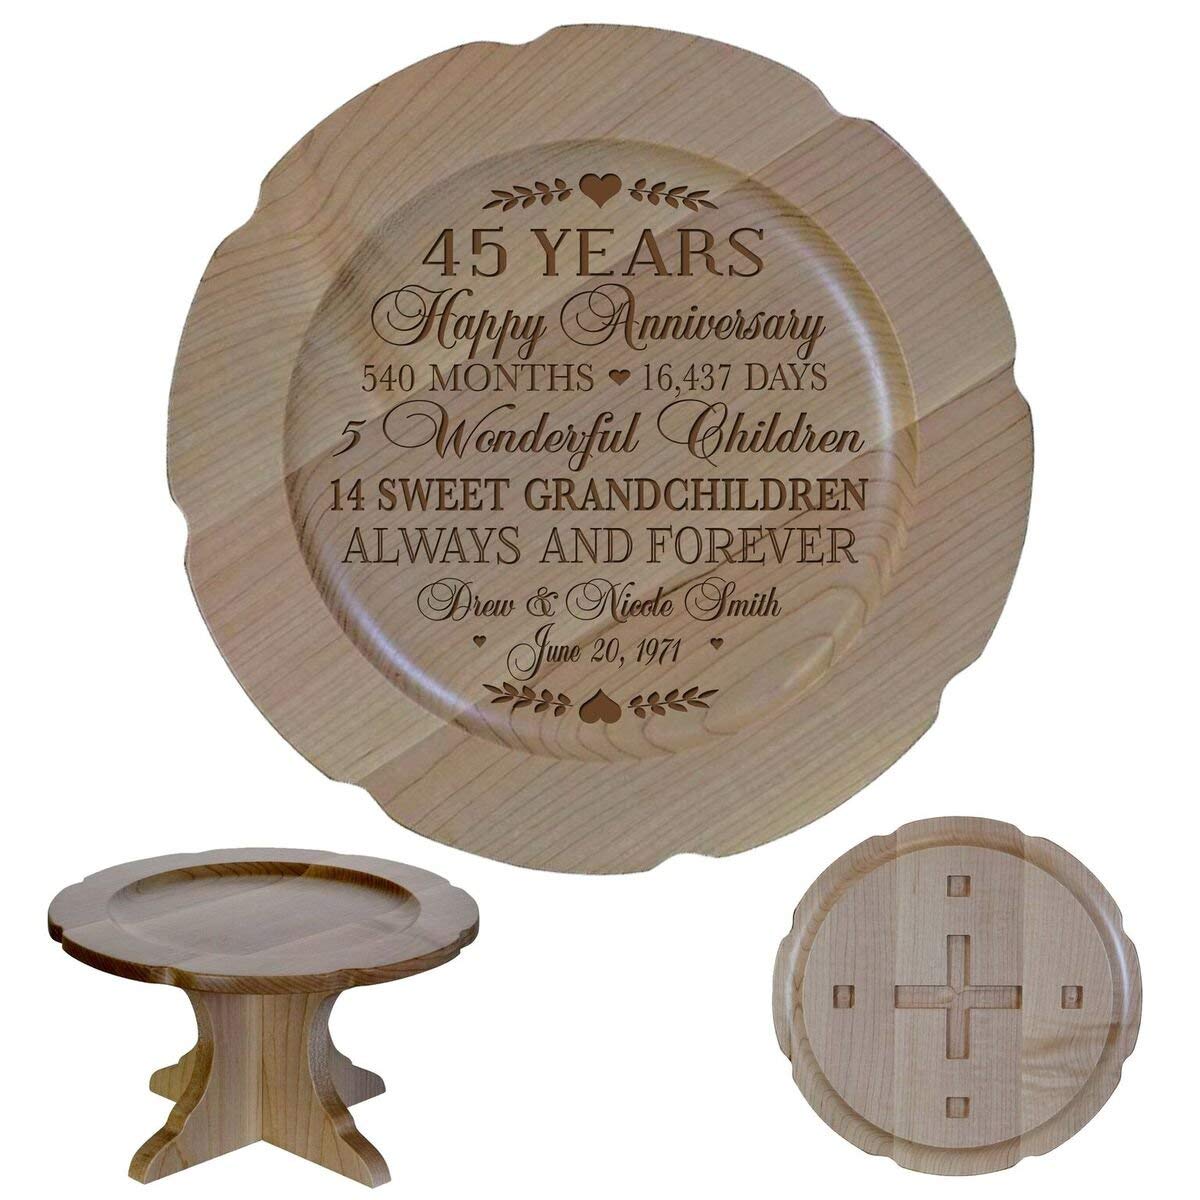 Personalized 45th Anniversary Maple Cake Stands - LifeSong Milestones